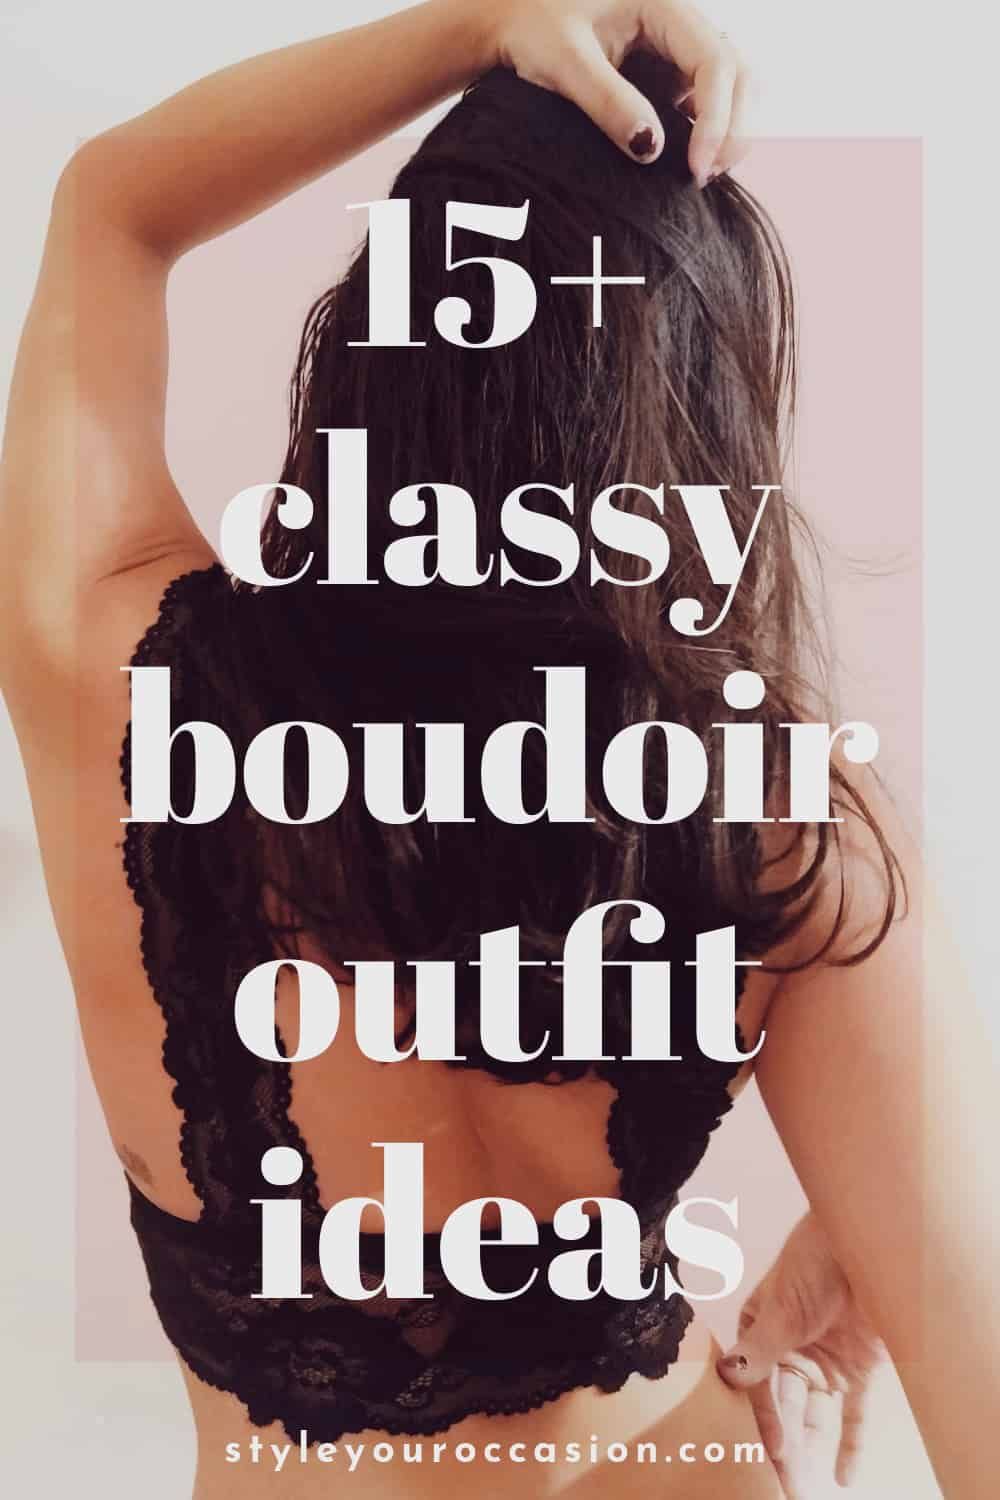 15+ Classy Boudoir Outfit Ideas You'll Love | sexy, classy, stunning!